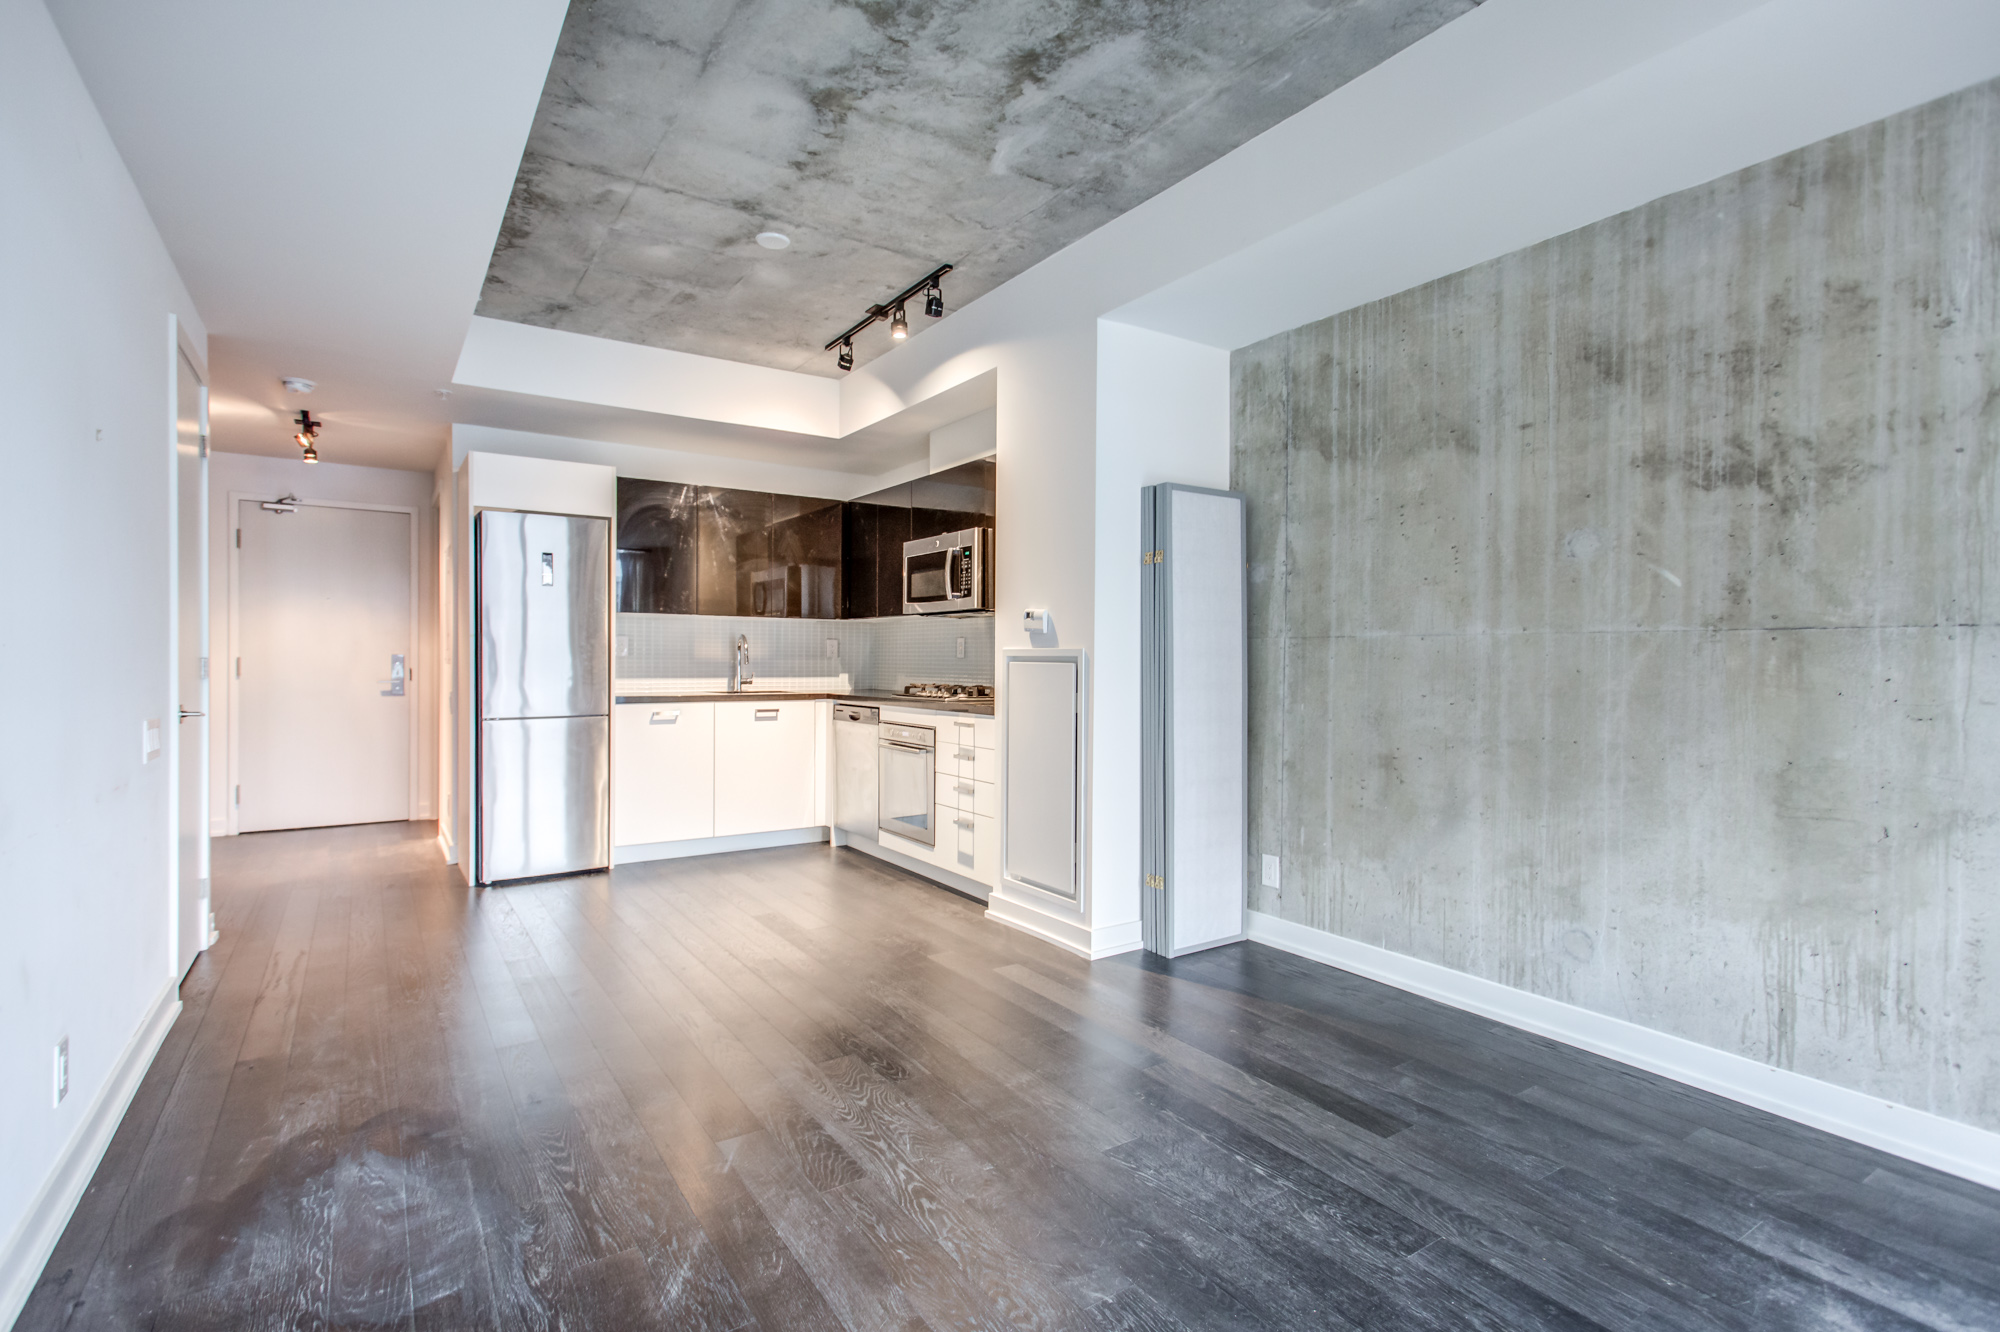 Spacious and empty condo unit at 39 Brant St Unit 918, Brant Park Lofts, in Queen West Toronto.